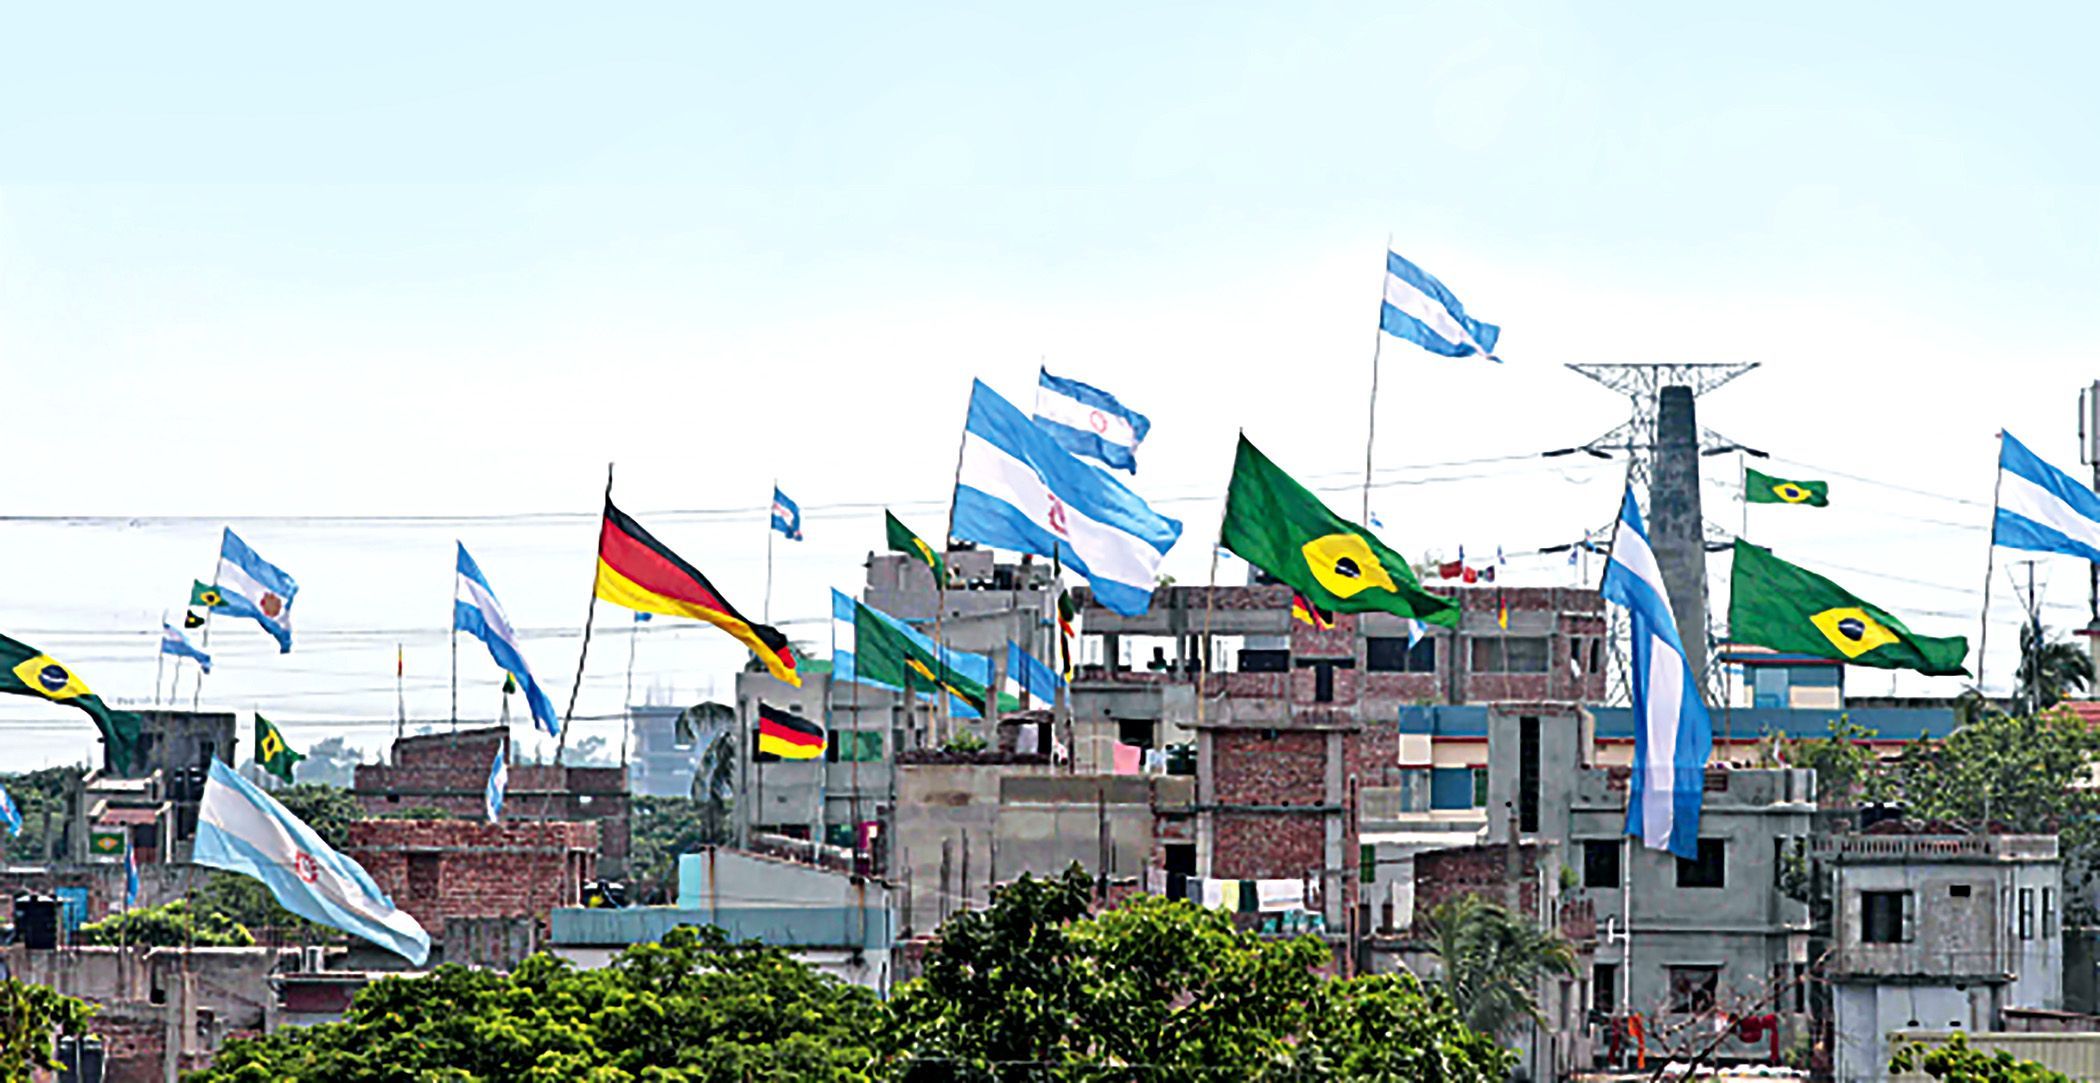 As always, the roofs of the capital's buildings are covered with flags. The photo was taken from Basabo area.